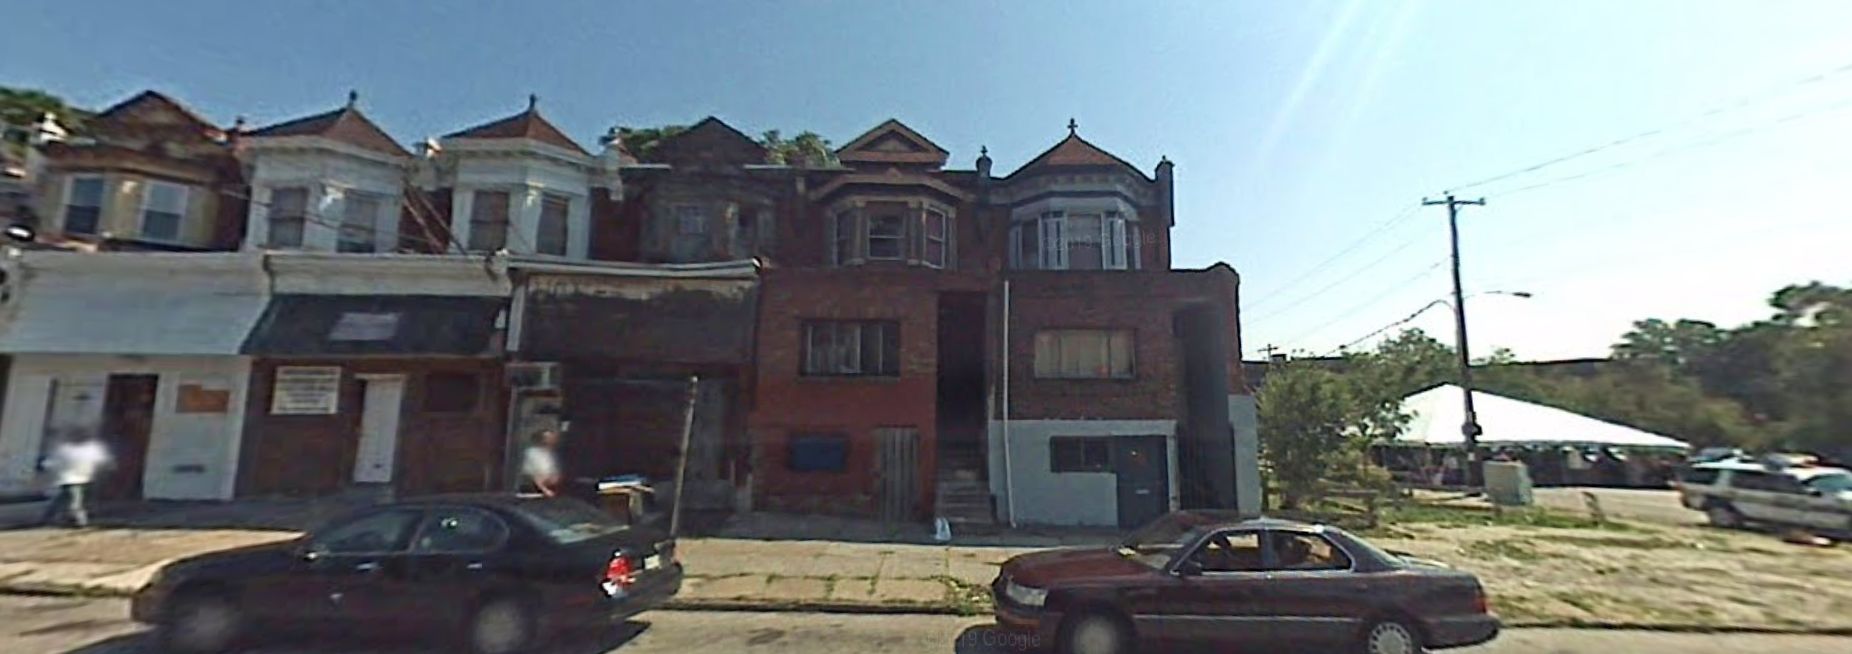 1437 South 58th Street. Site conditions prior to redevelopment. Looking northeast. August 2007. Credit: Google Maps